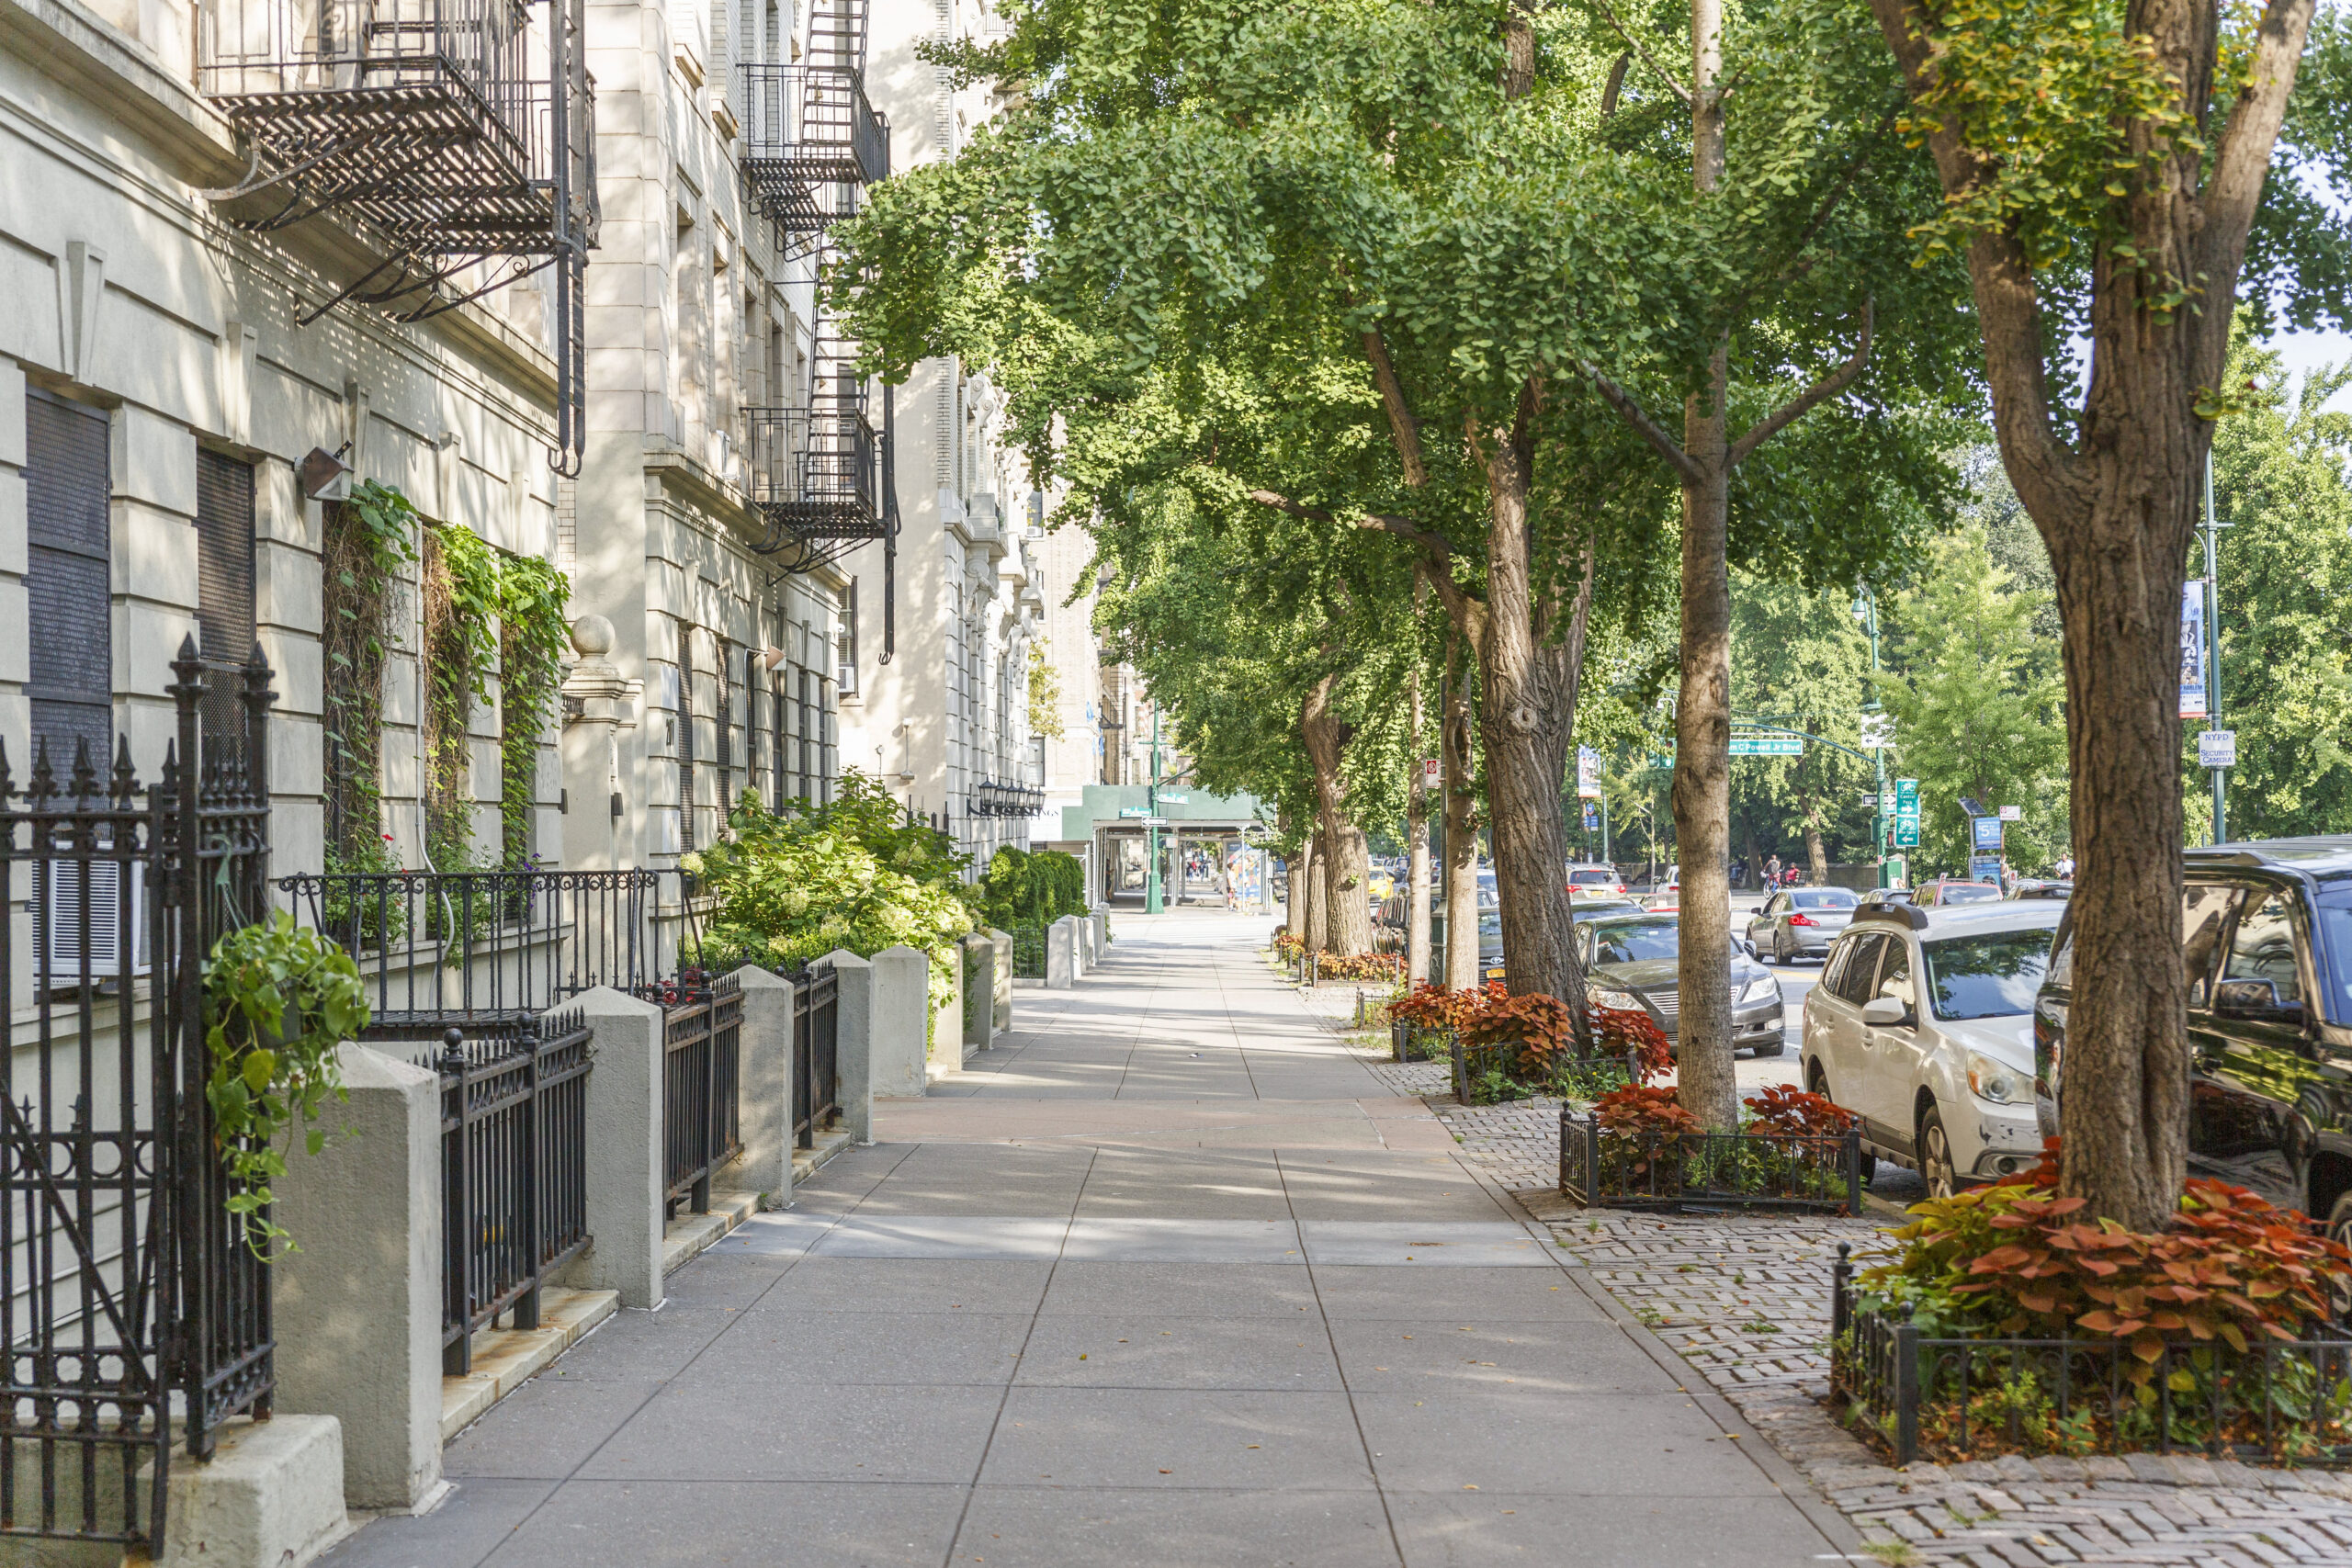 Sidewalk with buildings and trees in New York City.